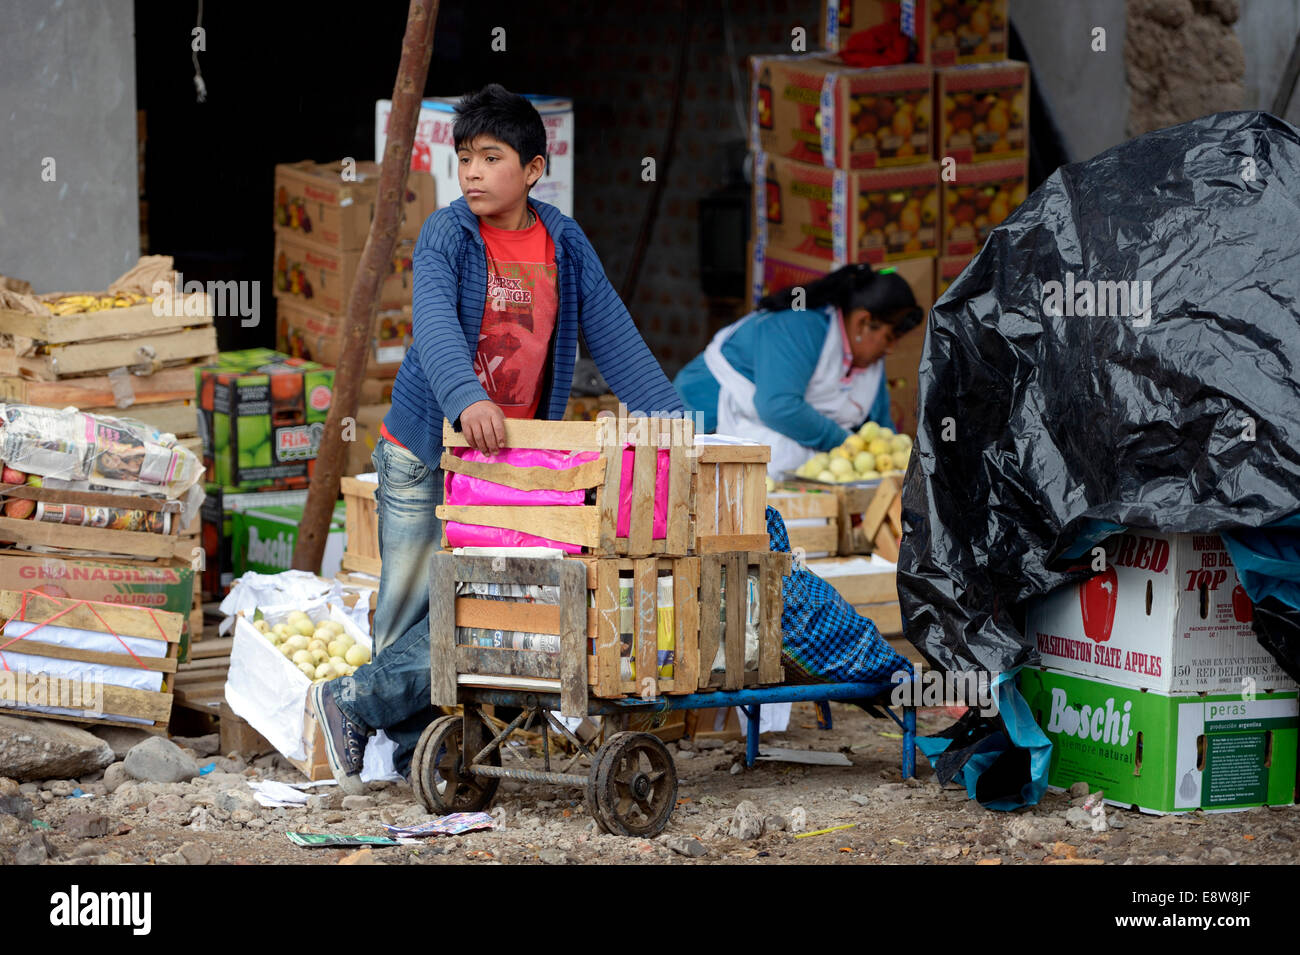 Child labour, boy, 13 years, working as a porter at a market, Ayacucho, Ayacucho region, Peru Stock Photo